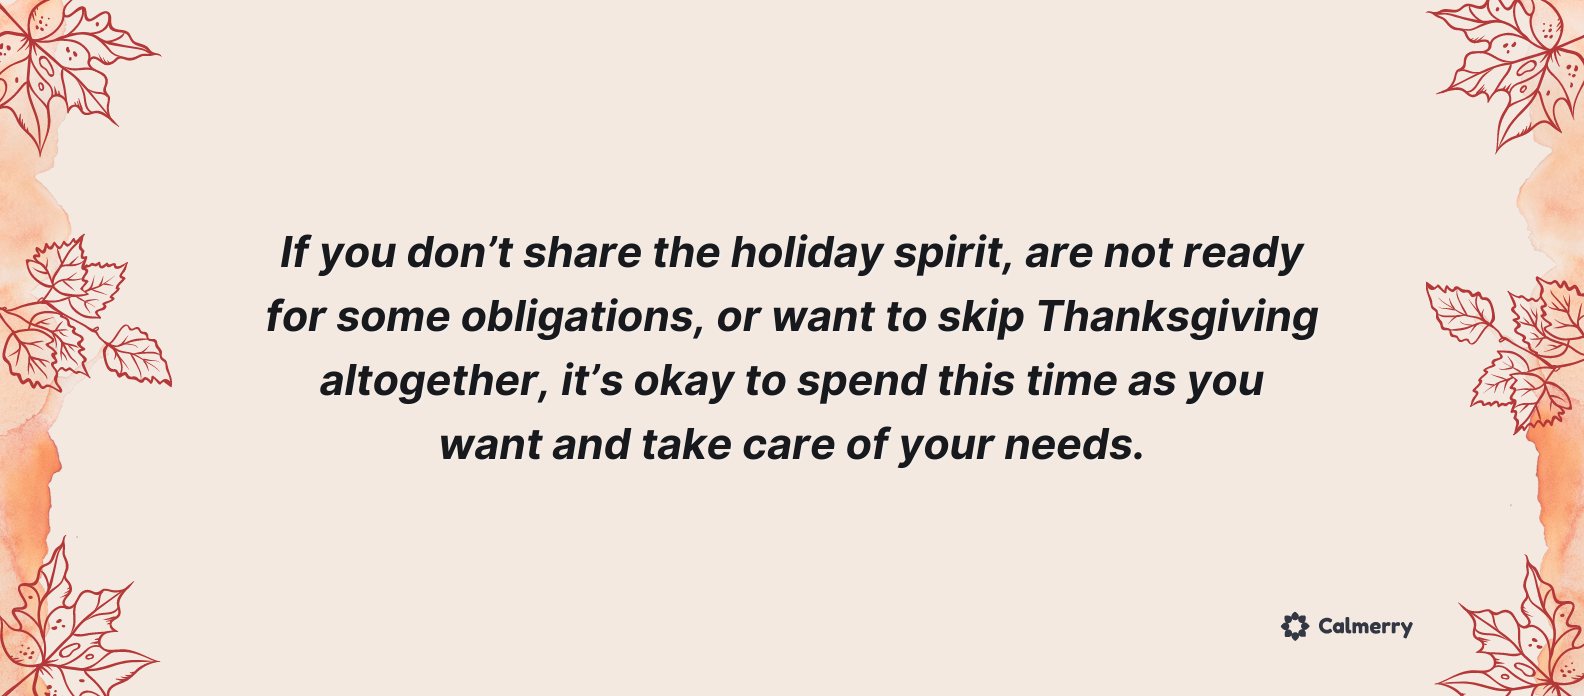 If you don’t share the holiday spirit, are not ready for some obligations, or want to skip Thanksgiving altogether, it’s okay to spend this time as you want and take care of your needs.